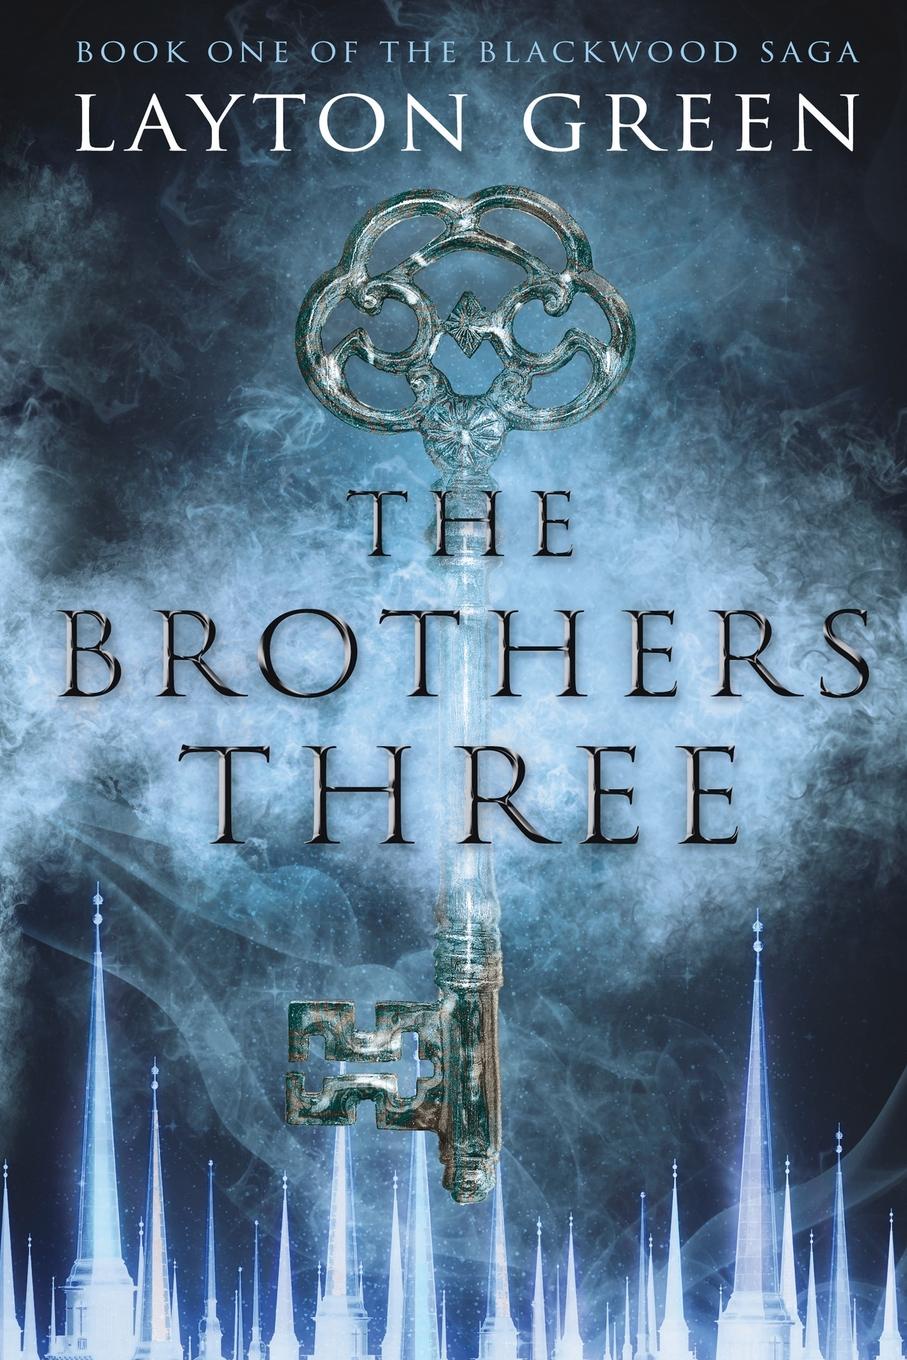 The book is on the three. Layton Green brothers three. The one книга. Three brothers 2014. One third.